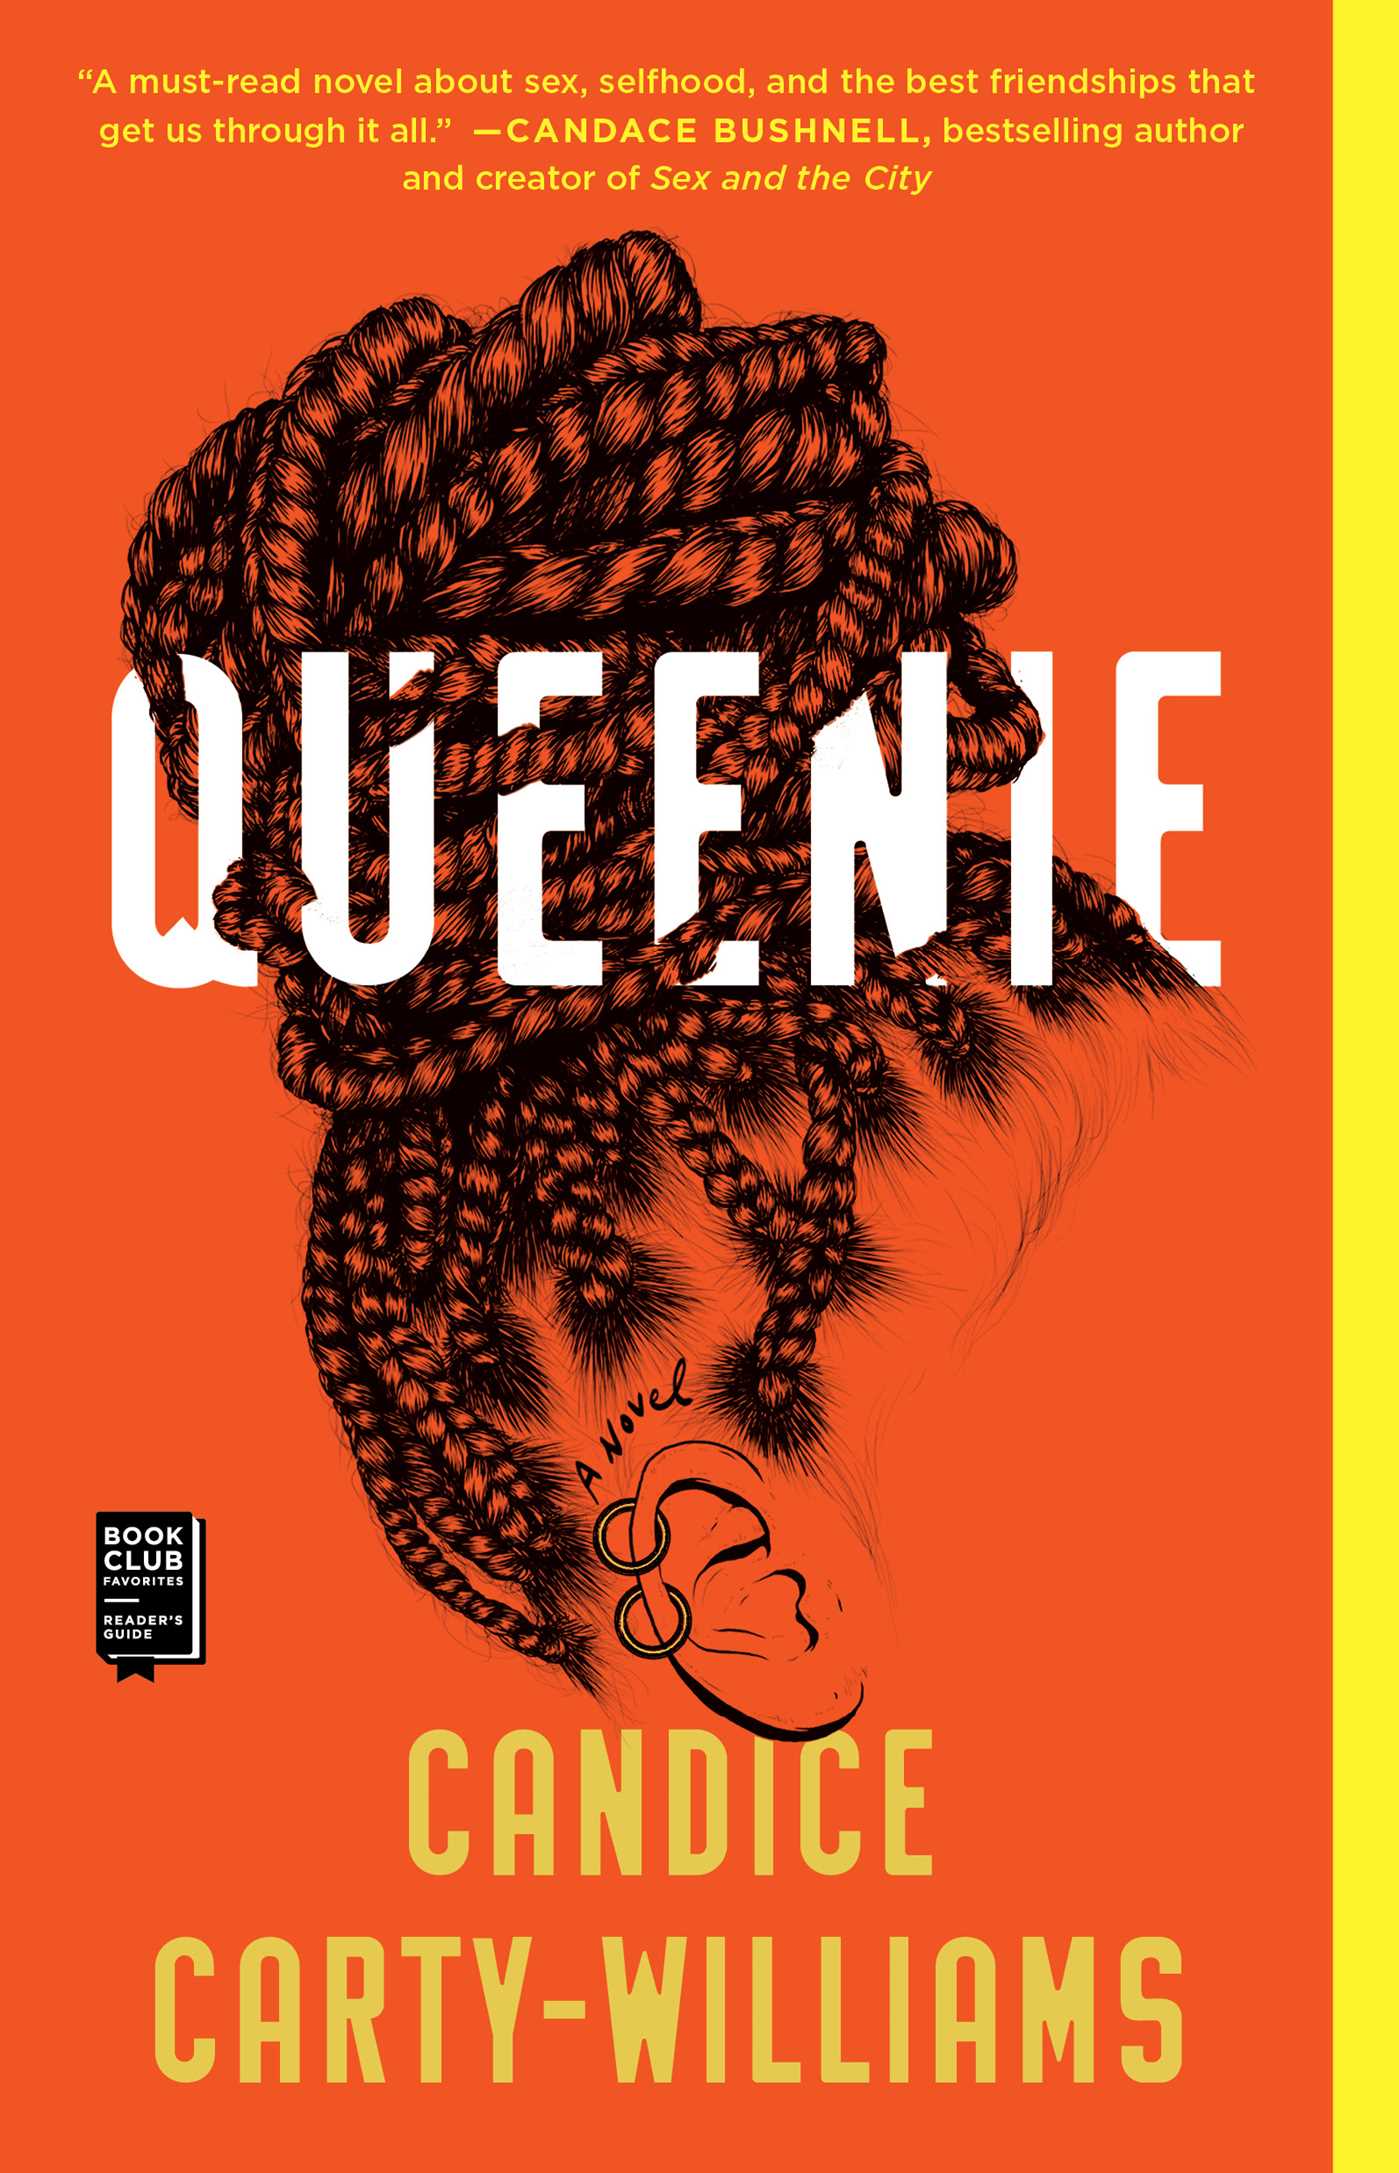 Book “Queenie” by Candice Carty-Williams — November 5, 2019